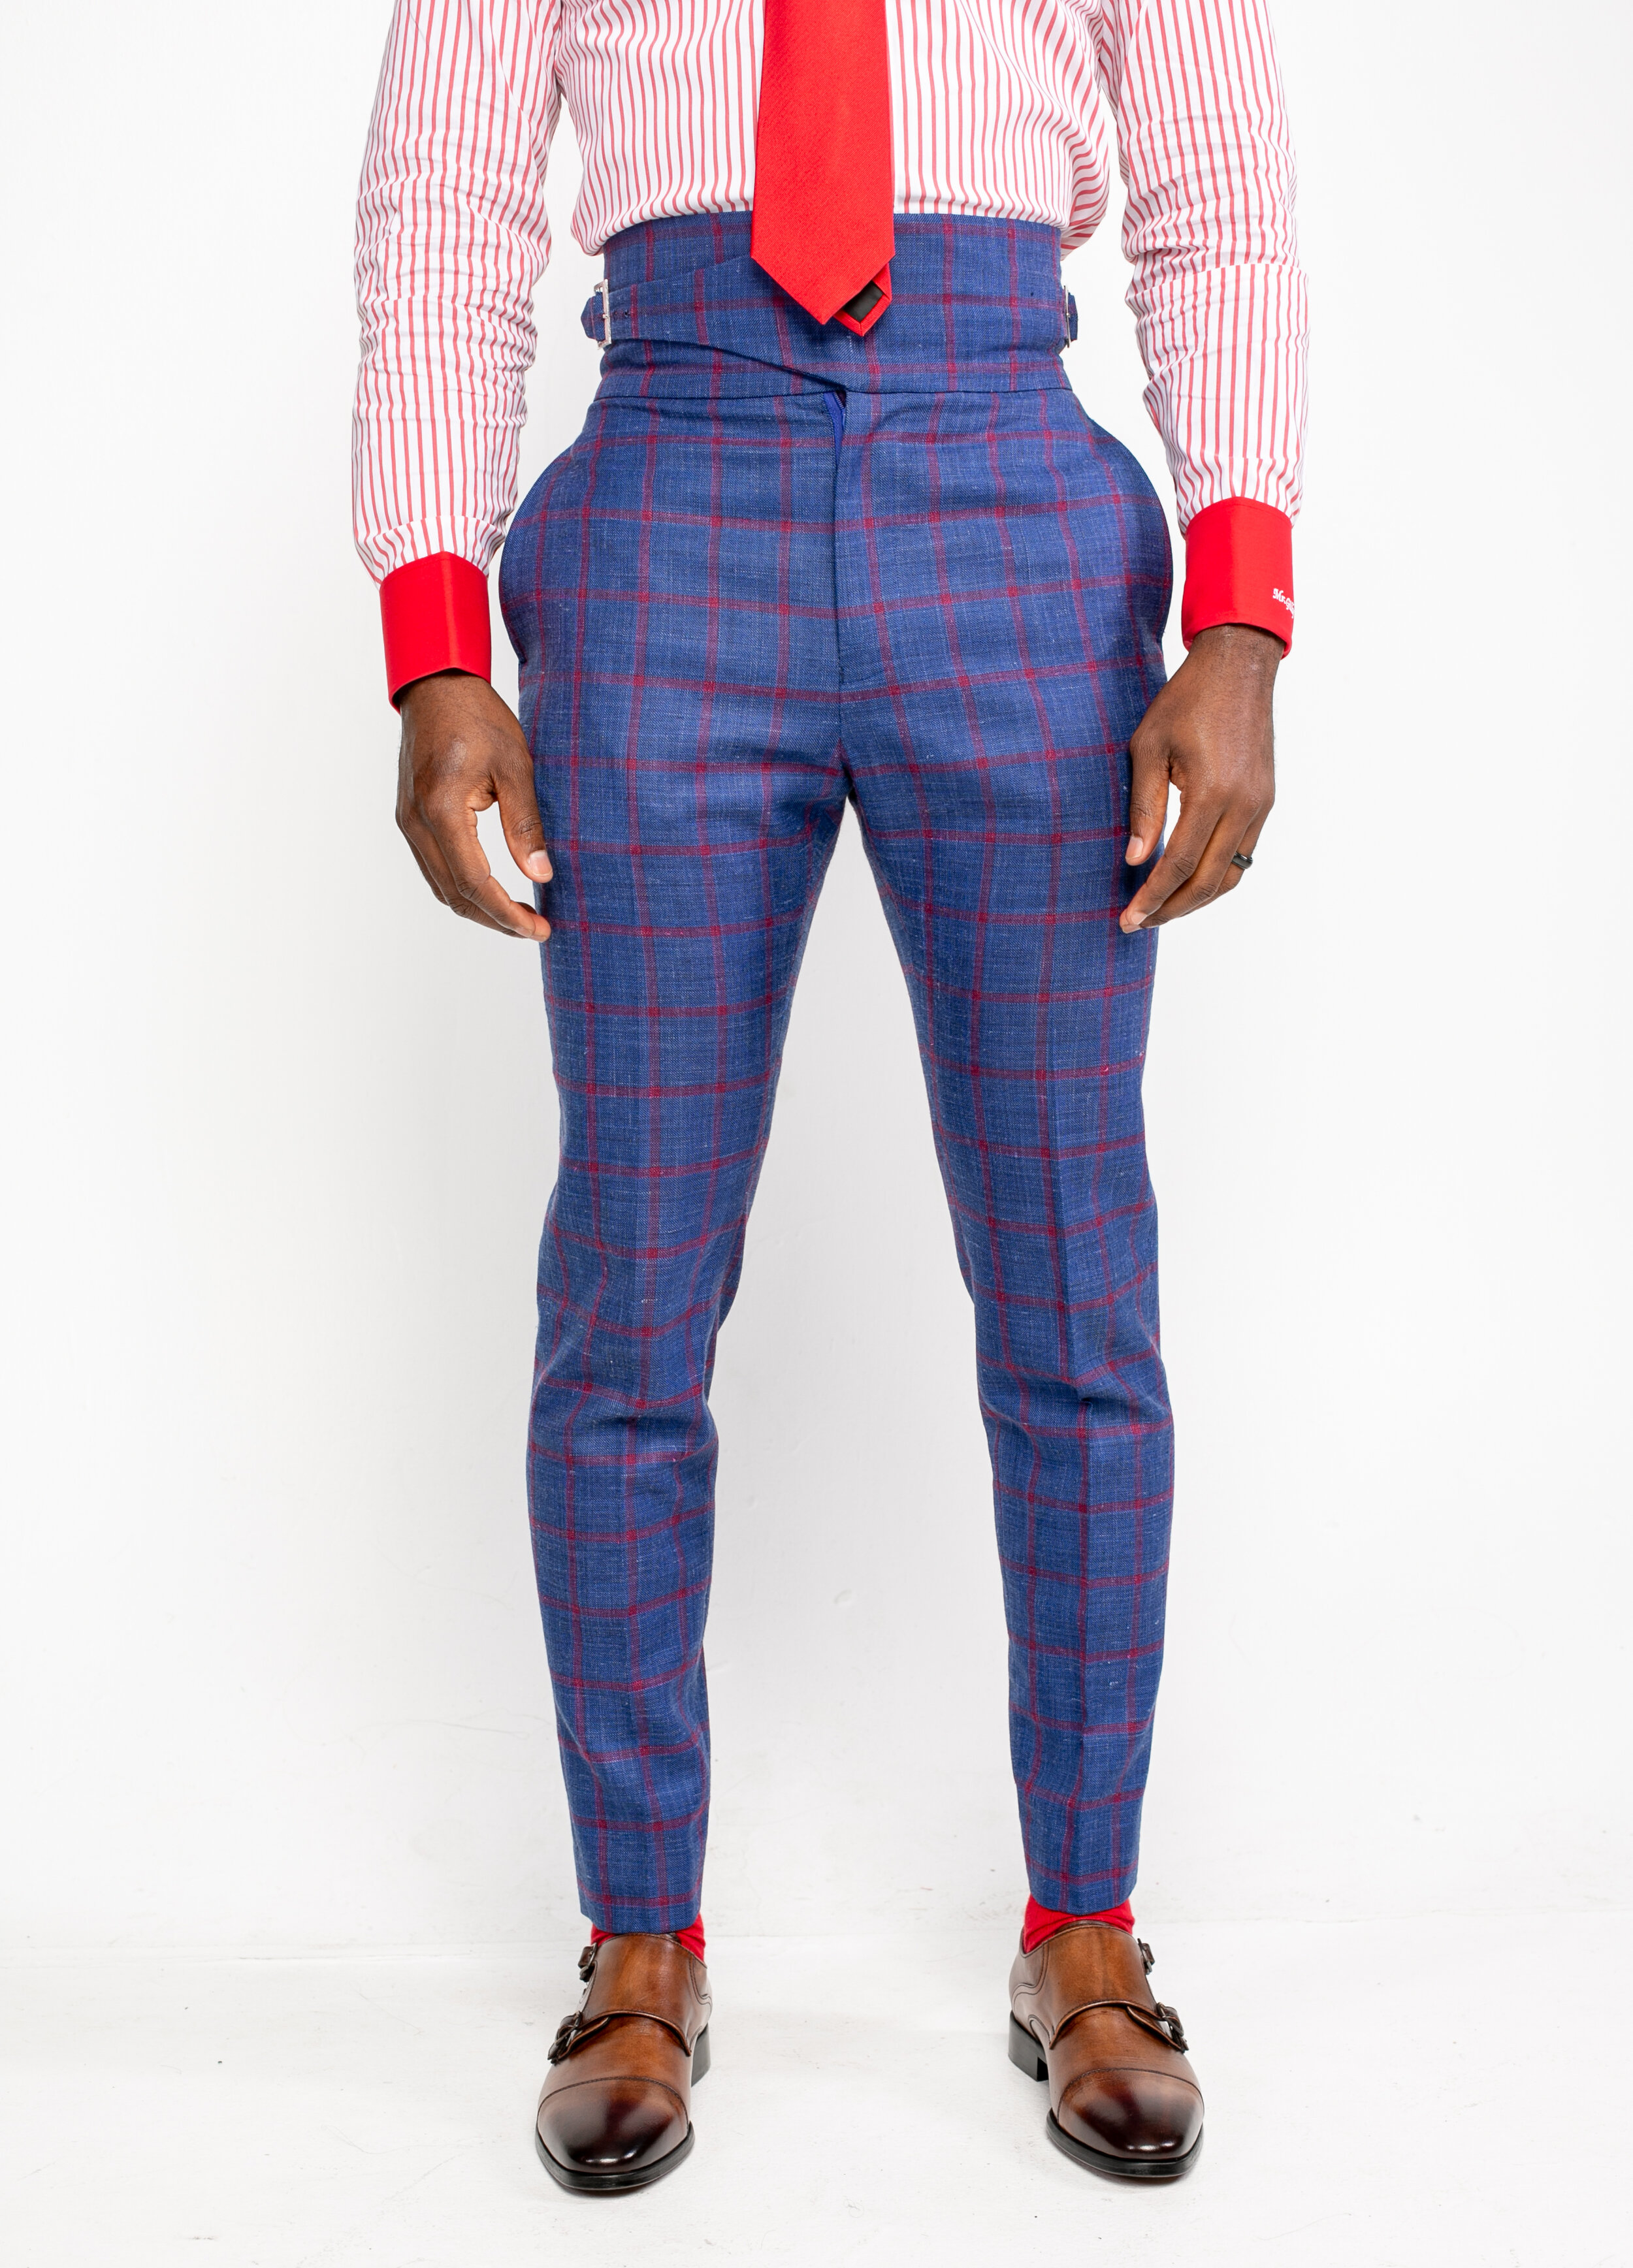 Blue/Red Window Pane with Stripe Mask, White Shirt/Red Accents 